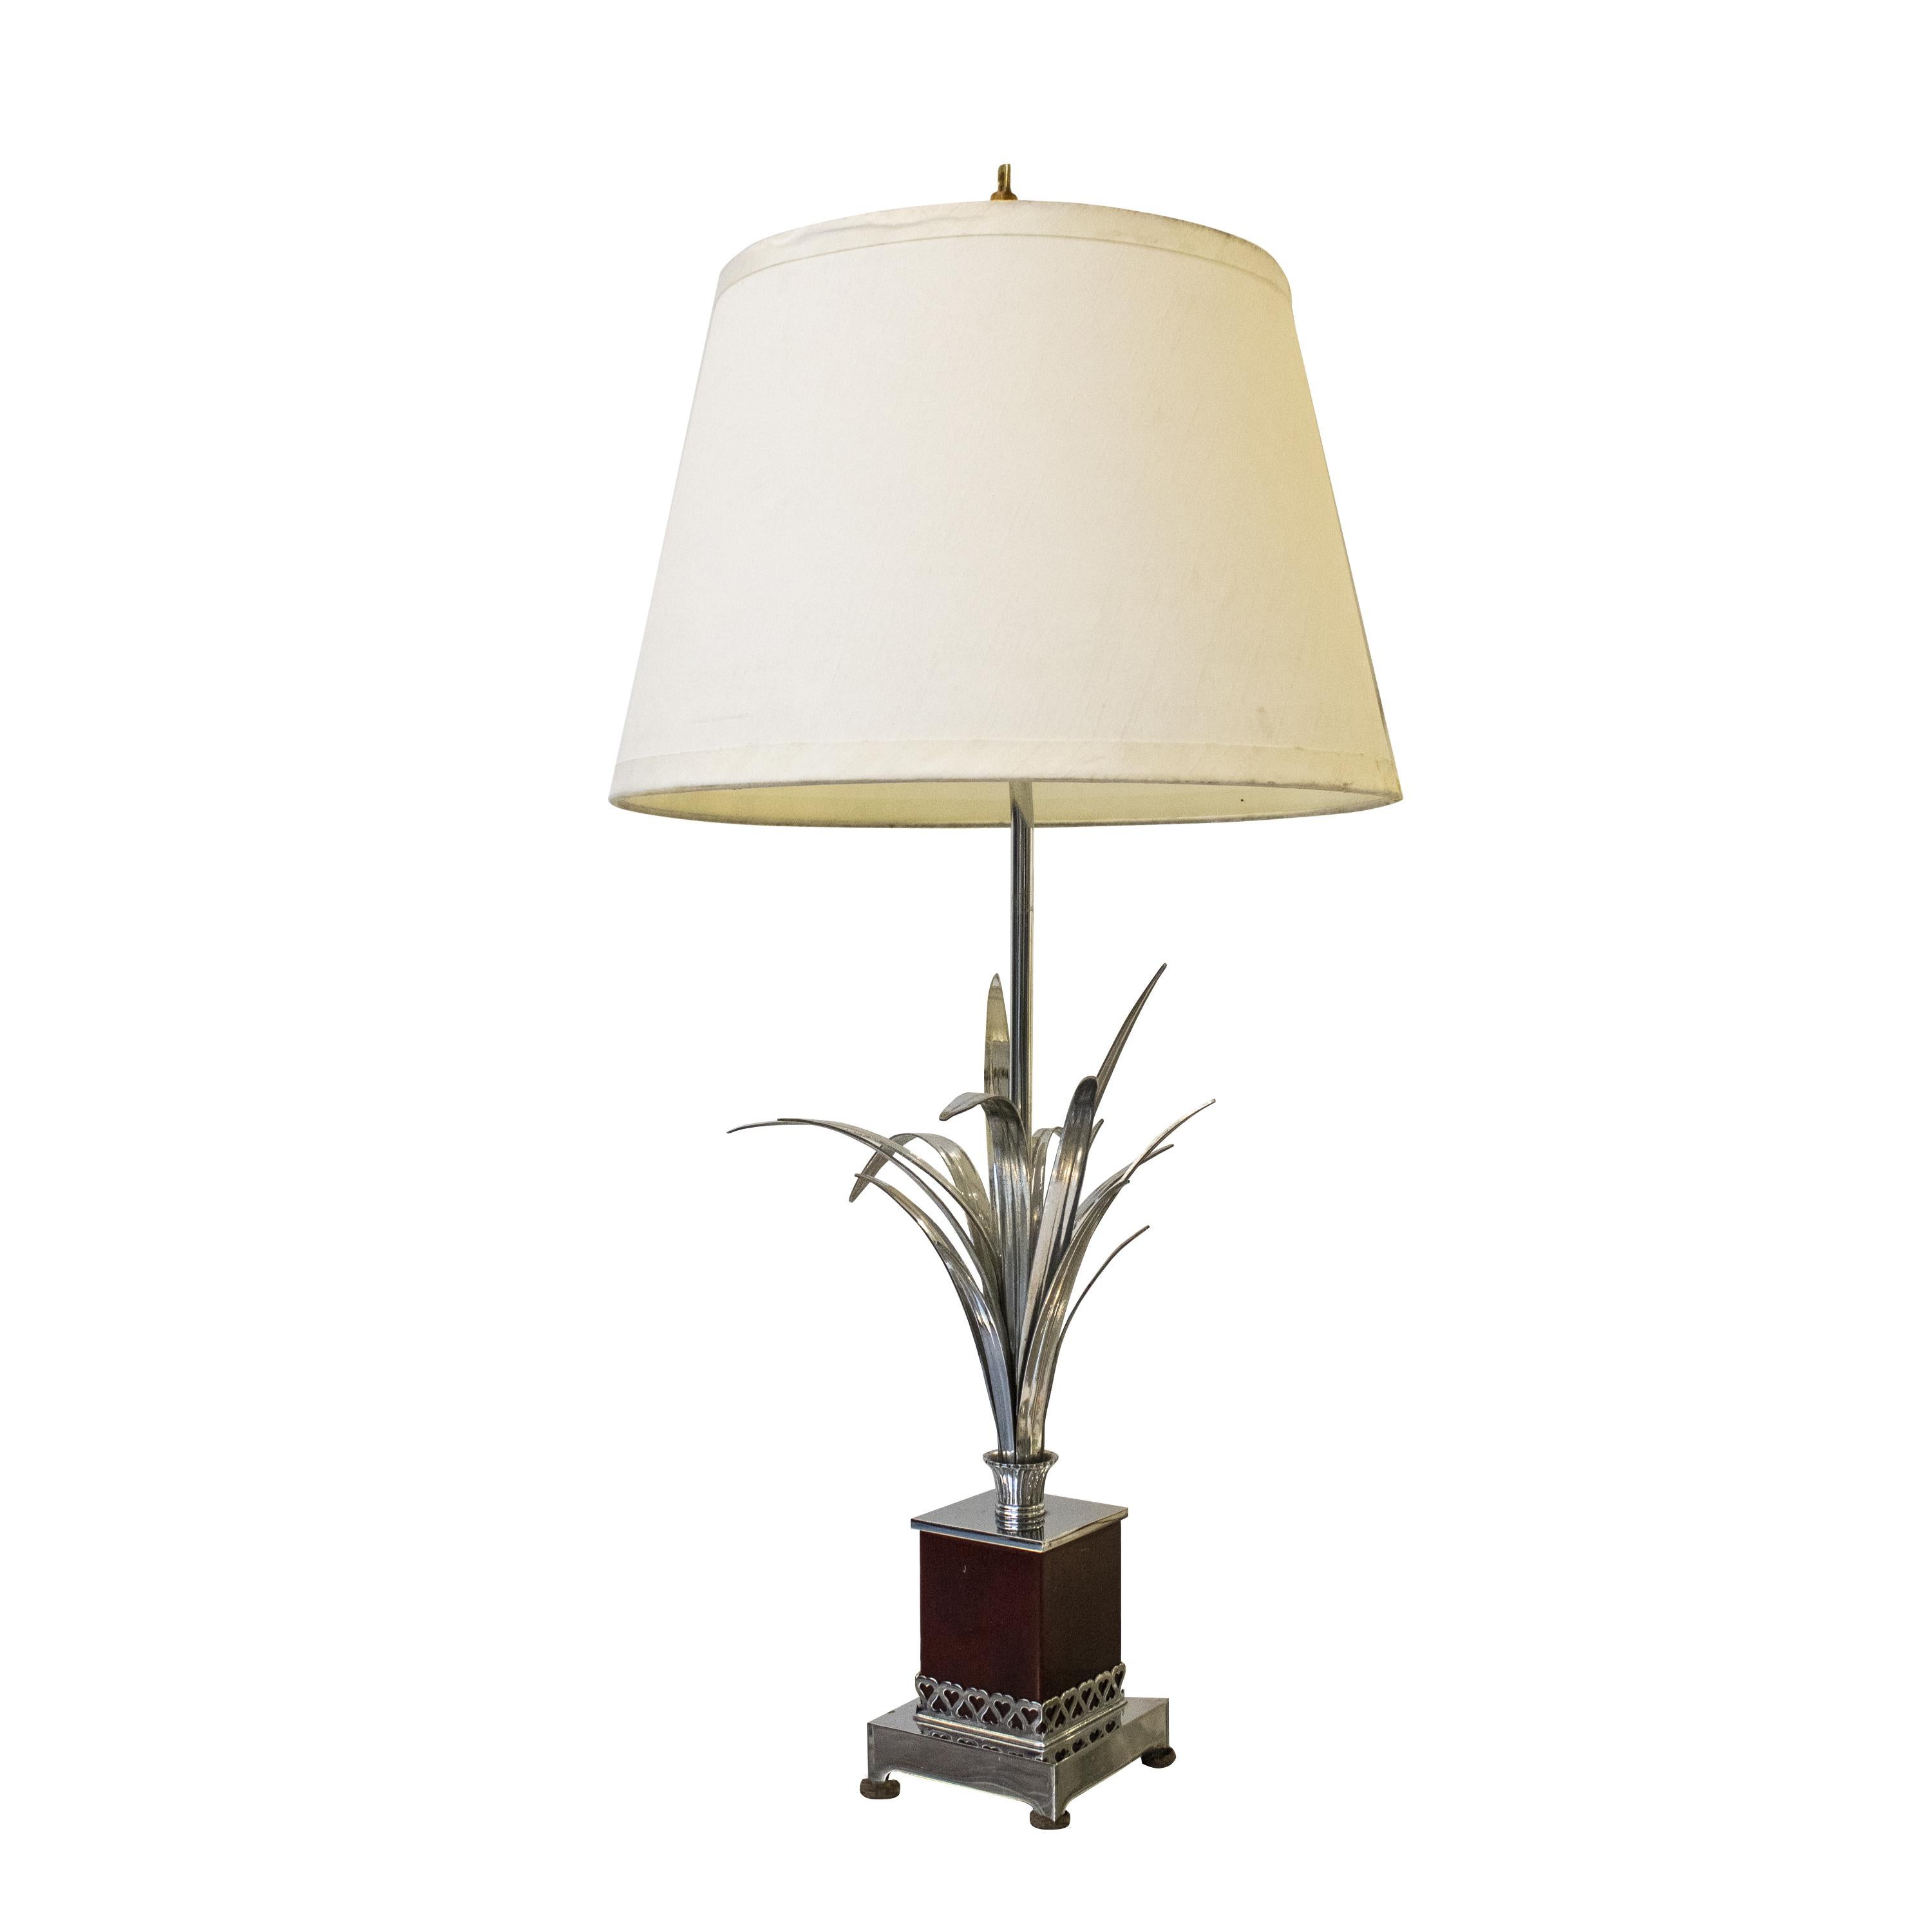 Italian steel table lamp from the 1960s. It is composed of a rectangular steel base with four support points. The base (2) is covered in burgundy plastic and hurt-shaped ornaments. This lamp's leg is made of metal a tube with sculptural leaves